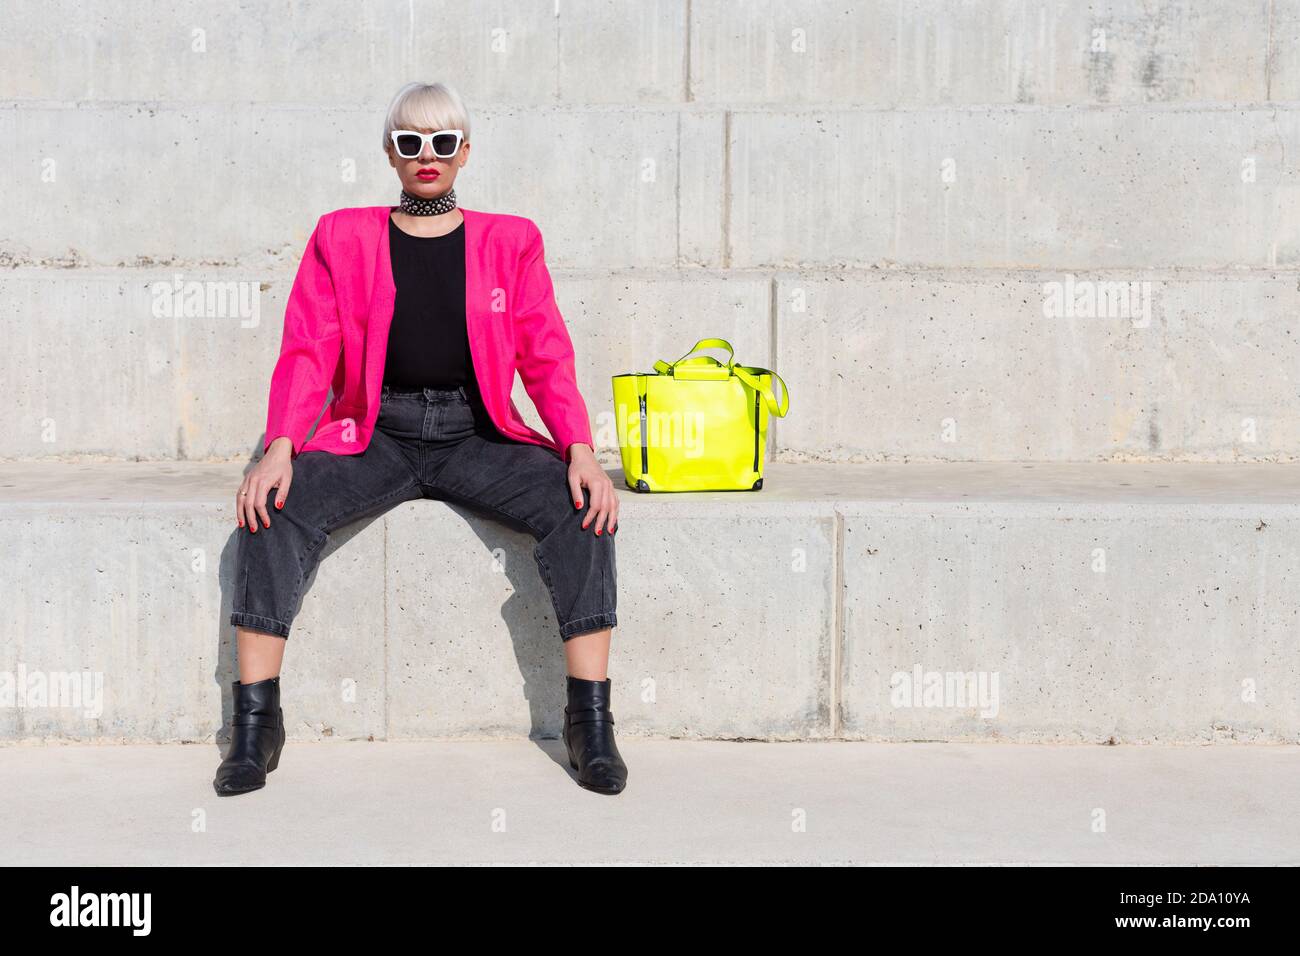 Confident female model wearing bright pink jacket sitting on stairs with vivid yellow handbag in city and looking at camera Stock Photo